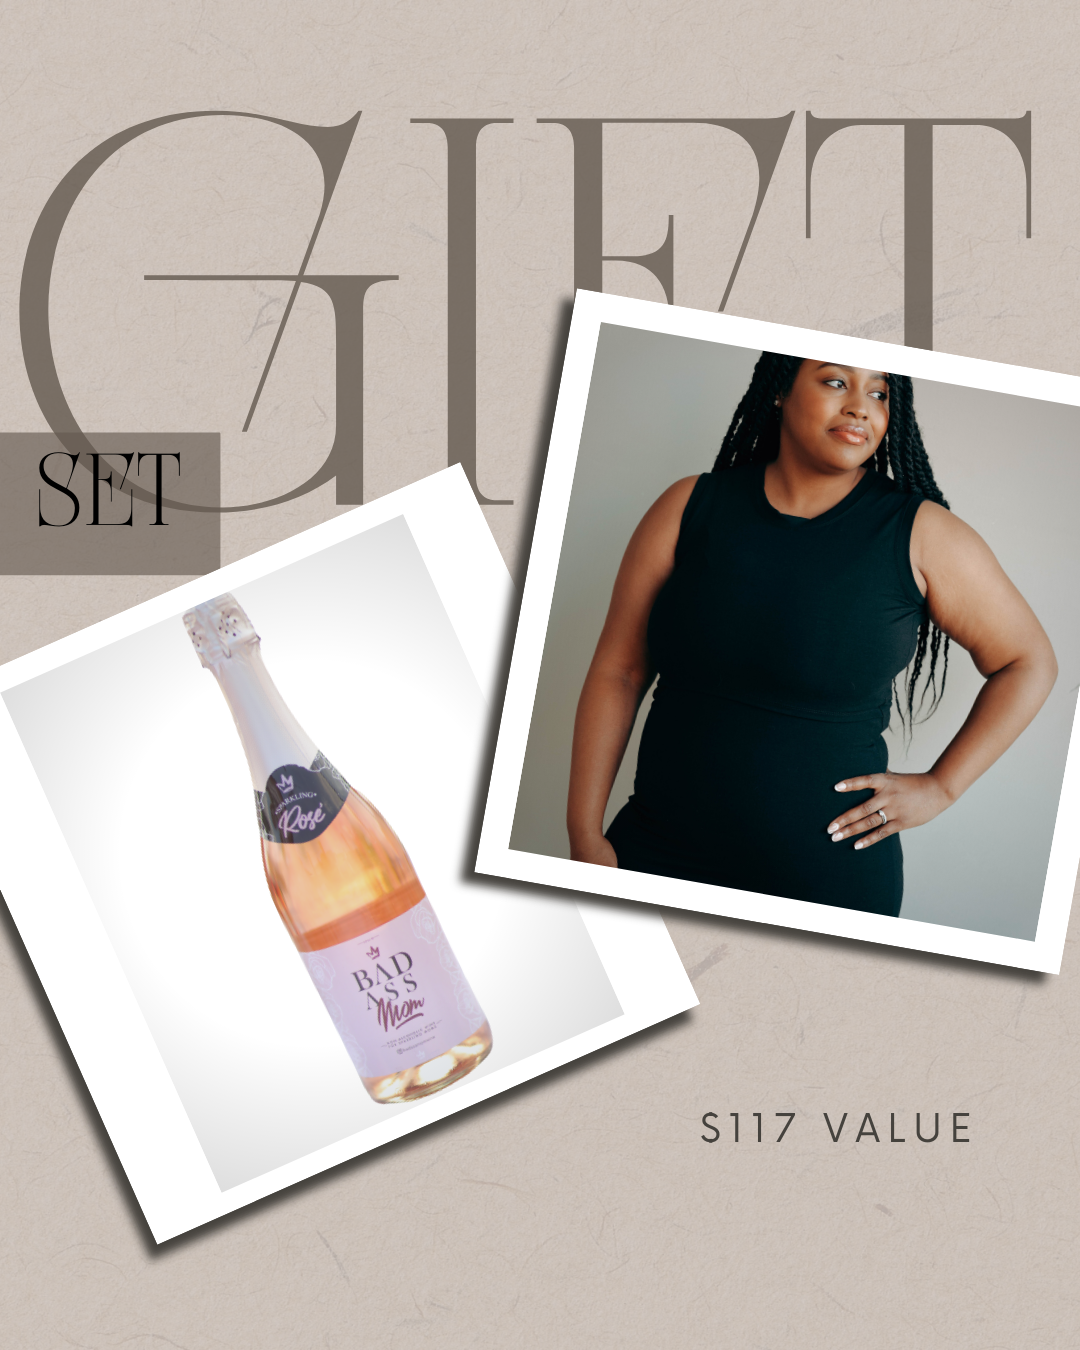 Limited Edition Holiday Gift Set - Little Breastfeeding Dress + Non-Alcoholic Wine